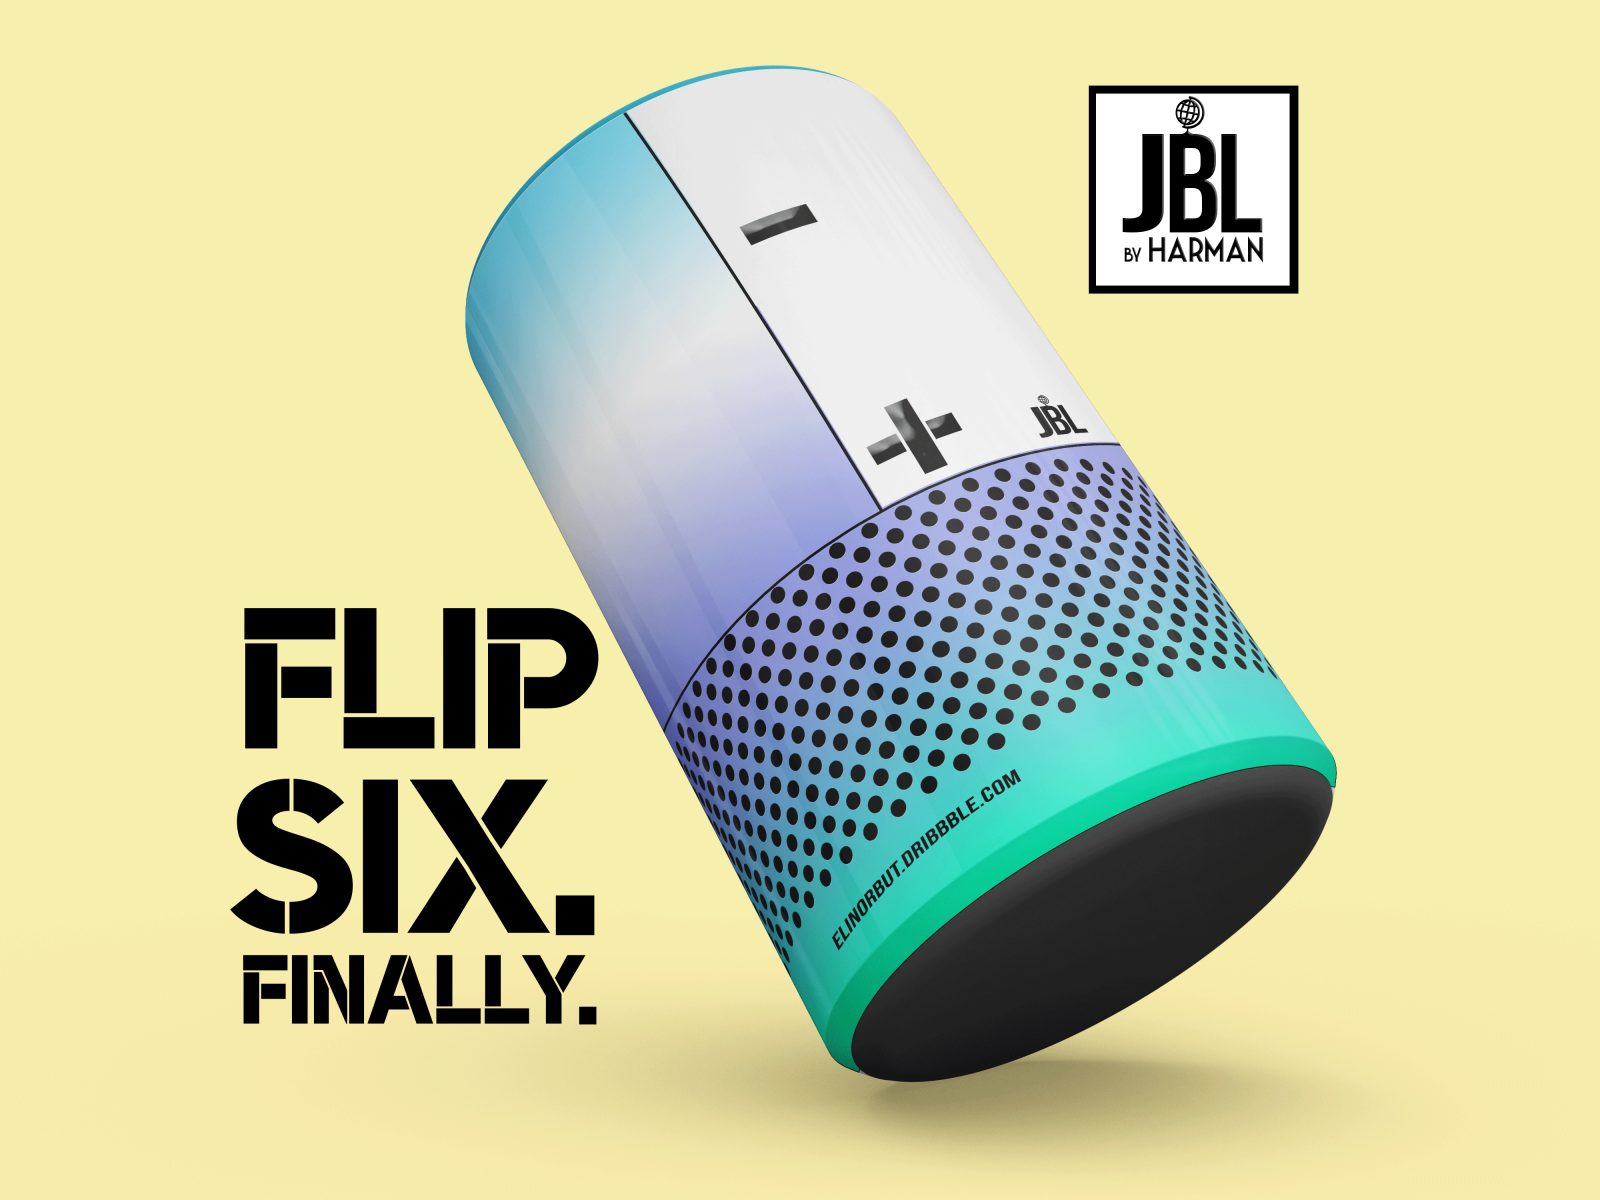 JBL Flip 6 Rebrand Campaign- Part Two by Eli Norbut on Dribbble